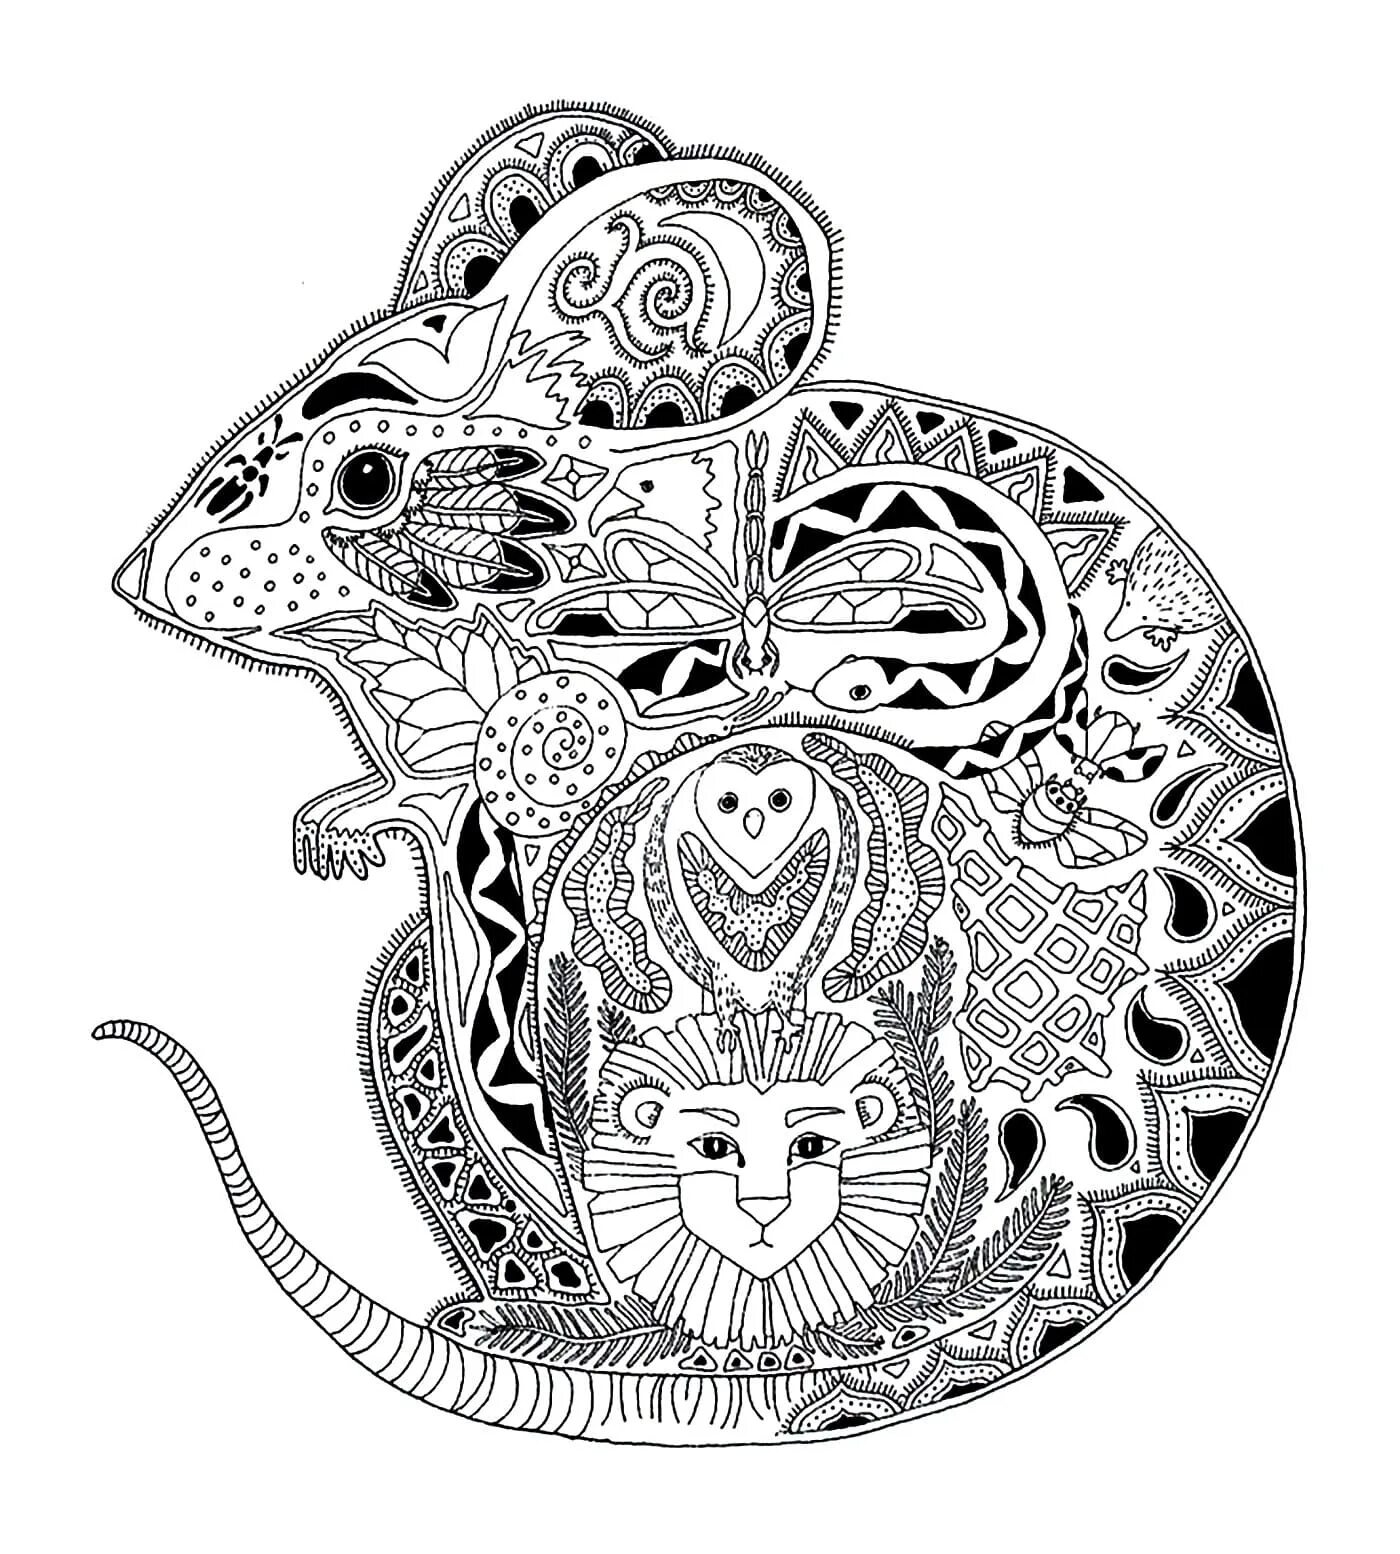 Fabulous patterned animal coloring book